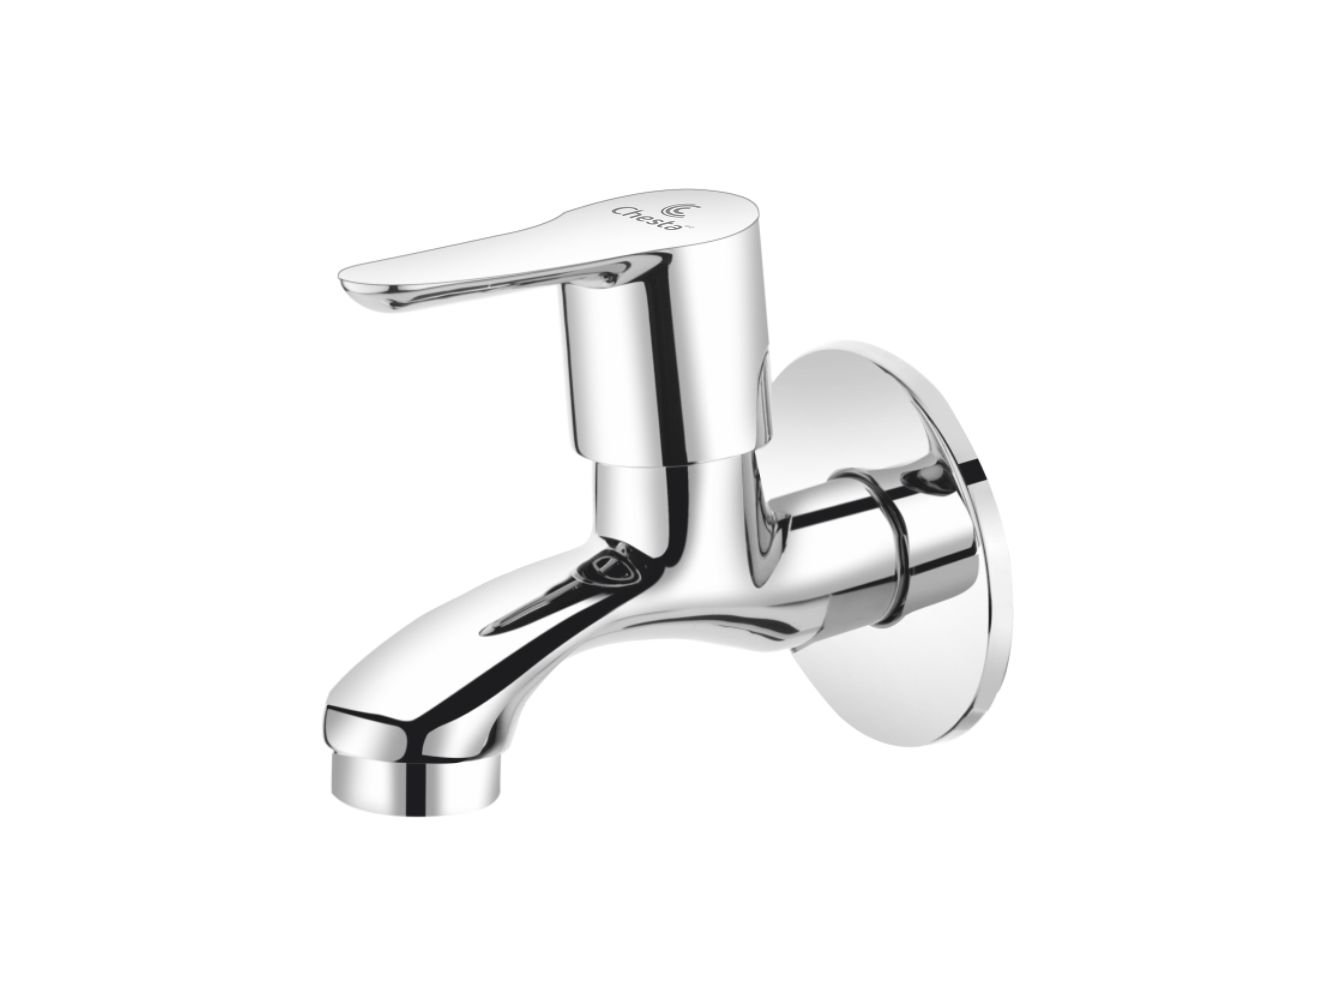 ID - 1001 - Bib Cock with Wall Flange at Chesta Bath Fittings